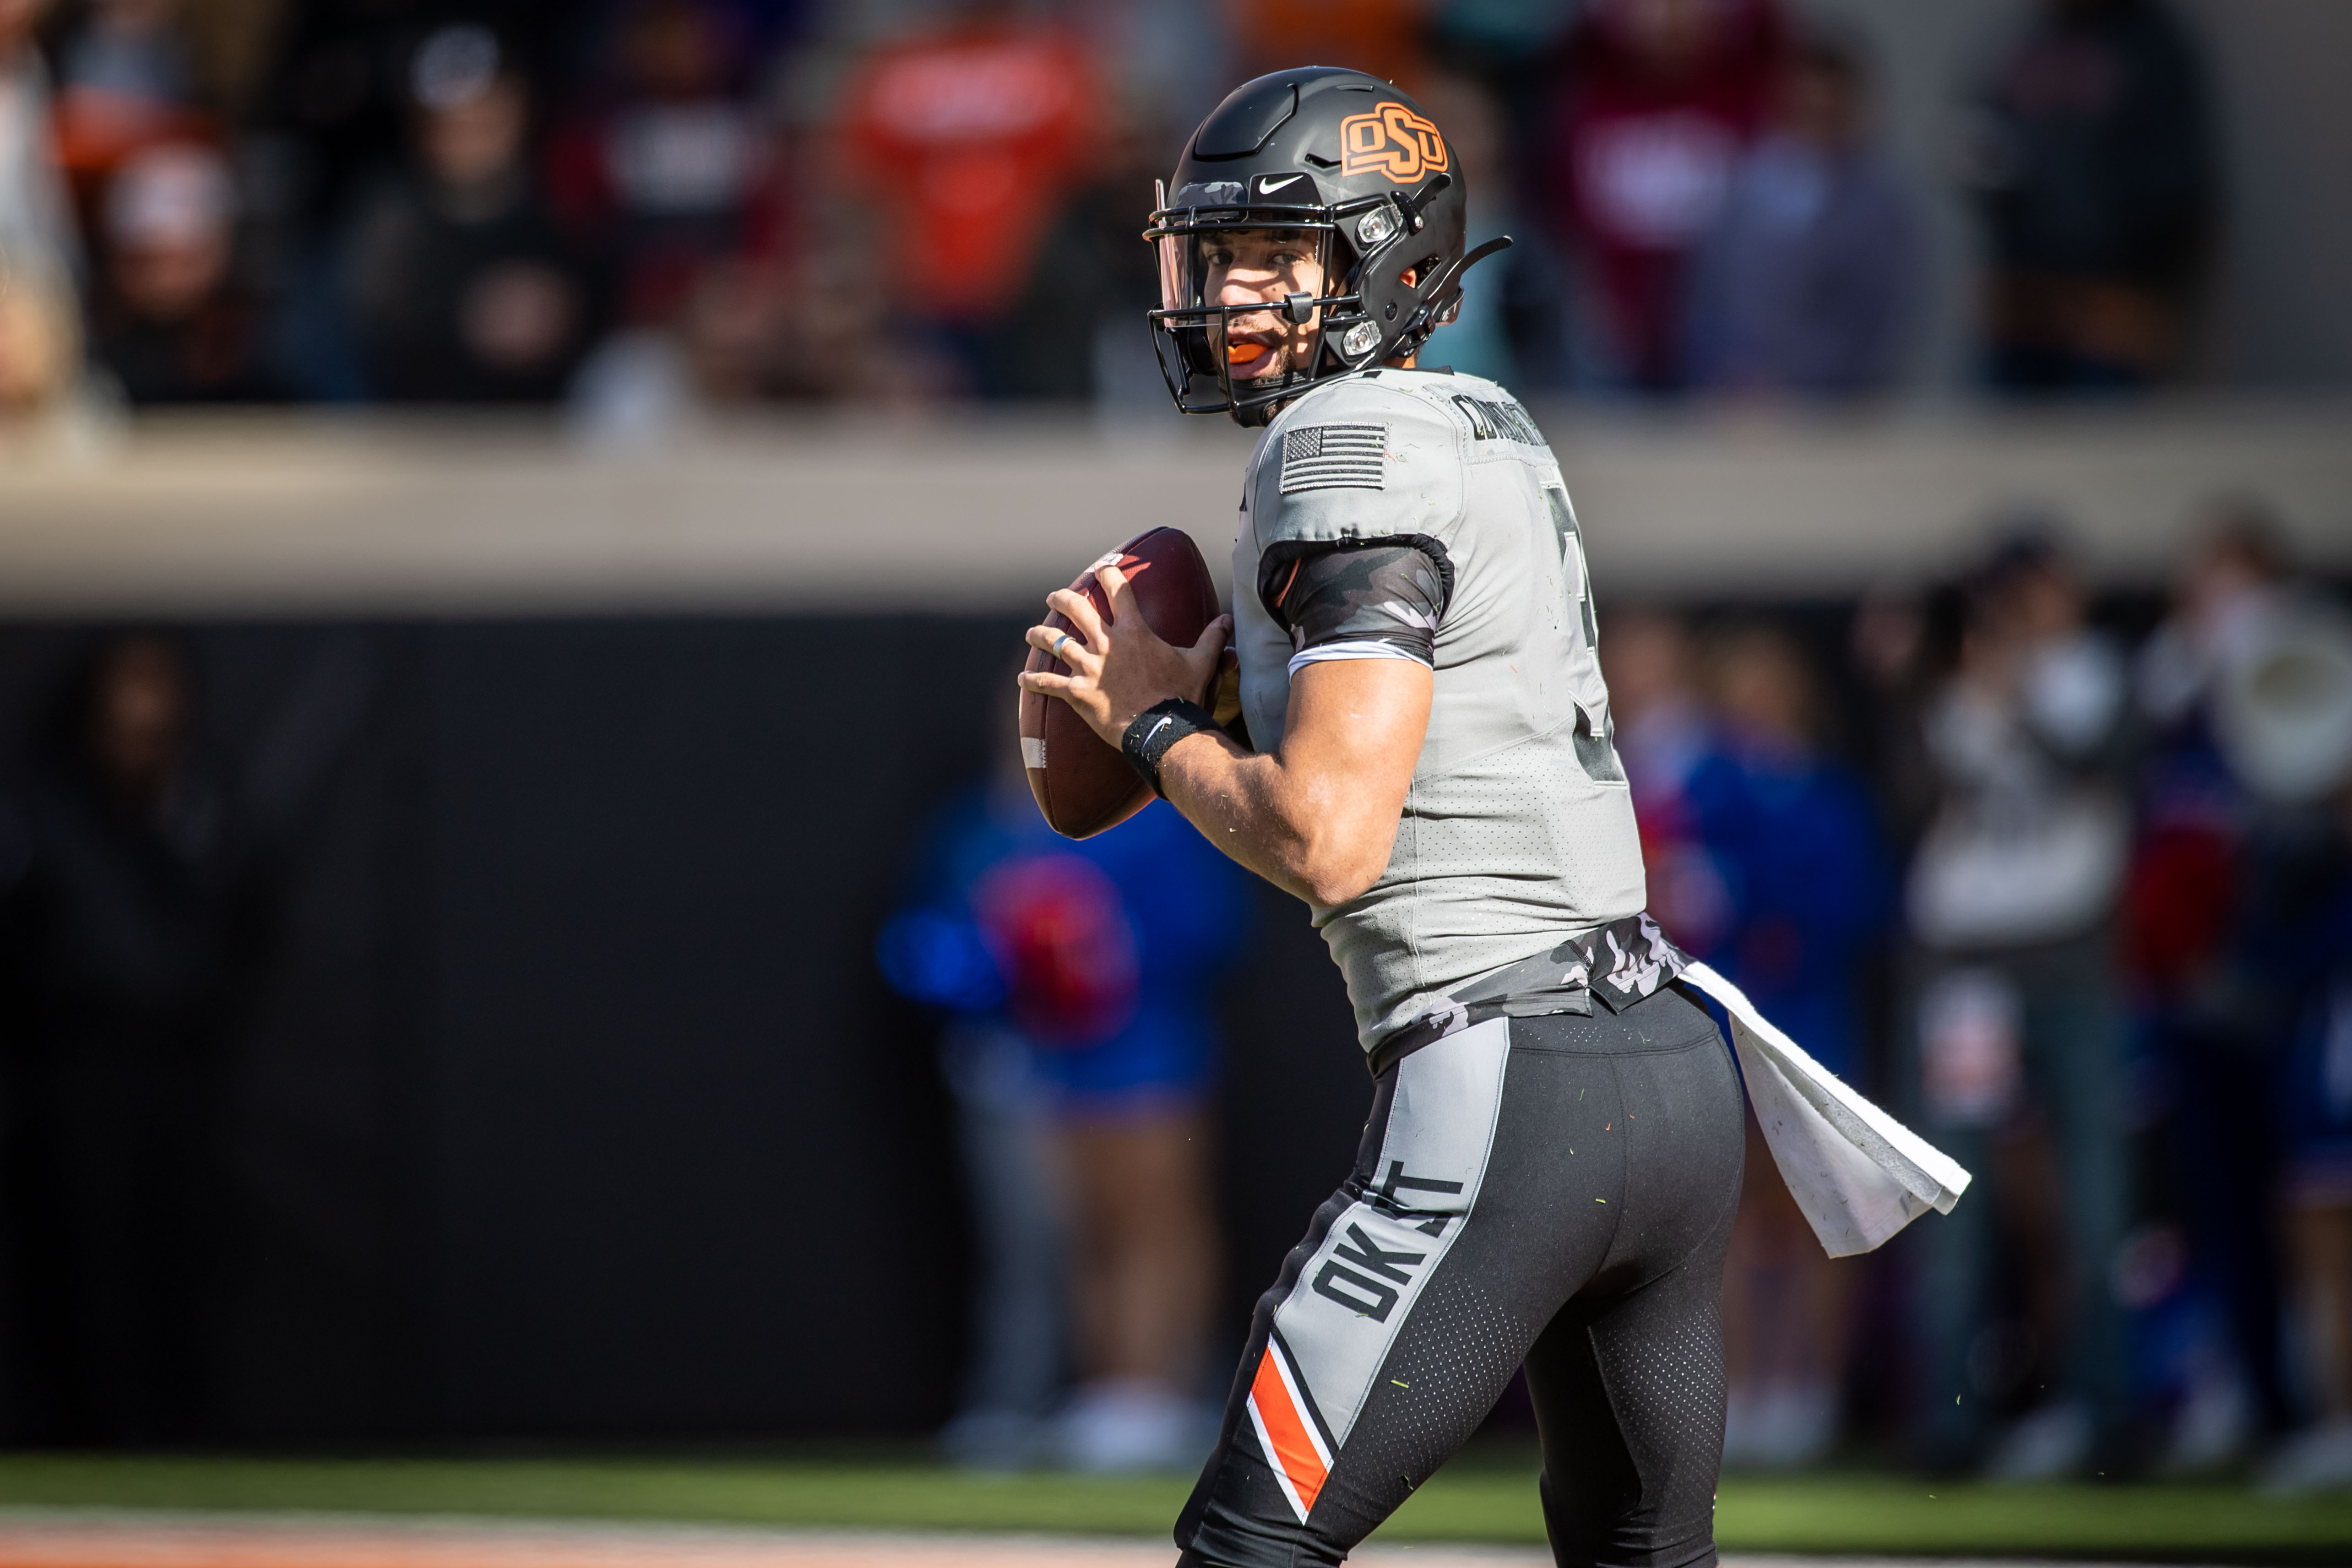 BREAKING Oklahoma State Starting QB Ruled Out for Remainder of Season